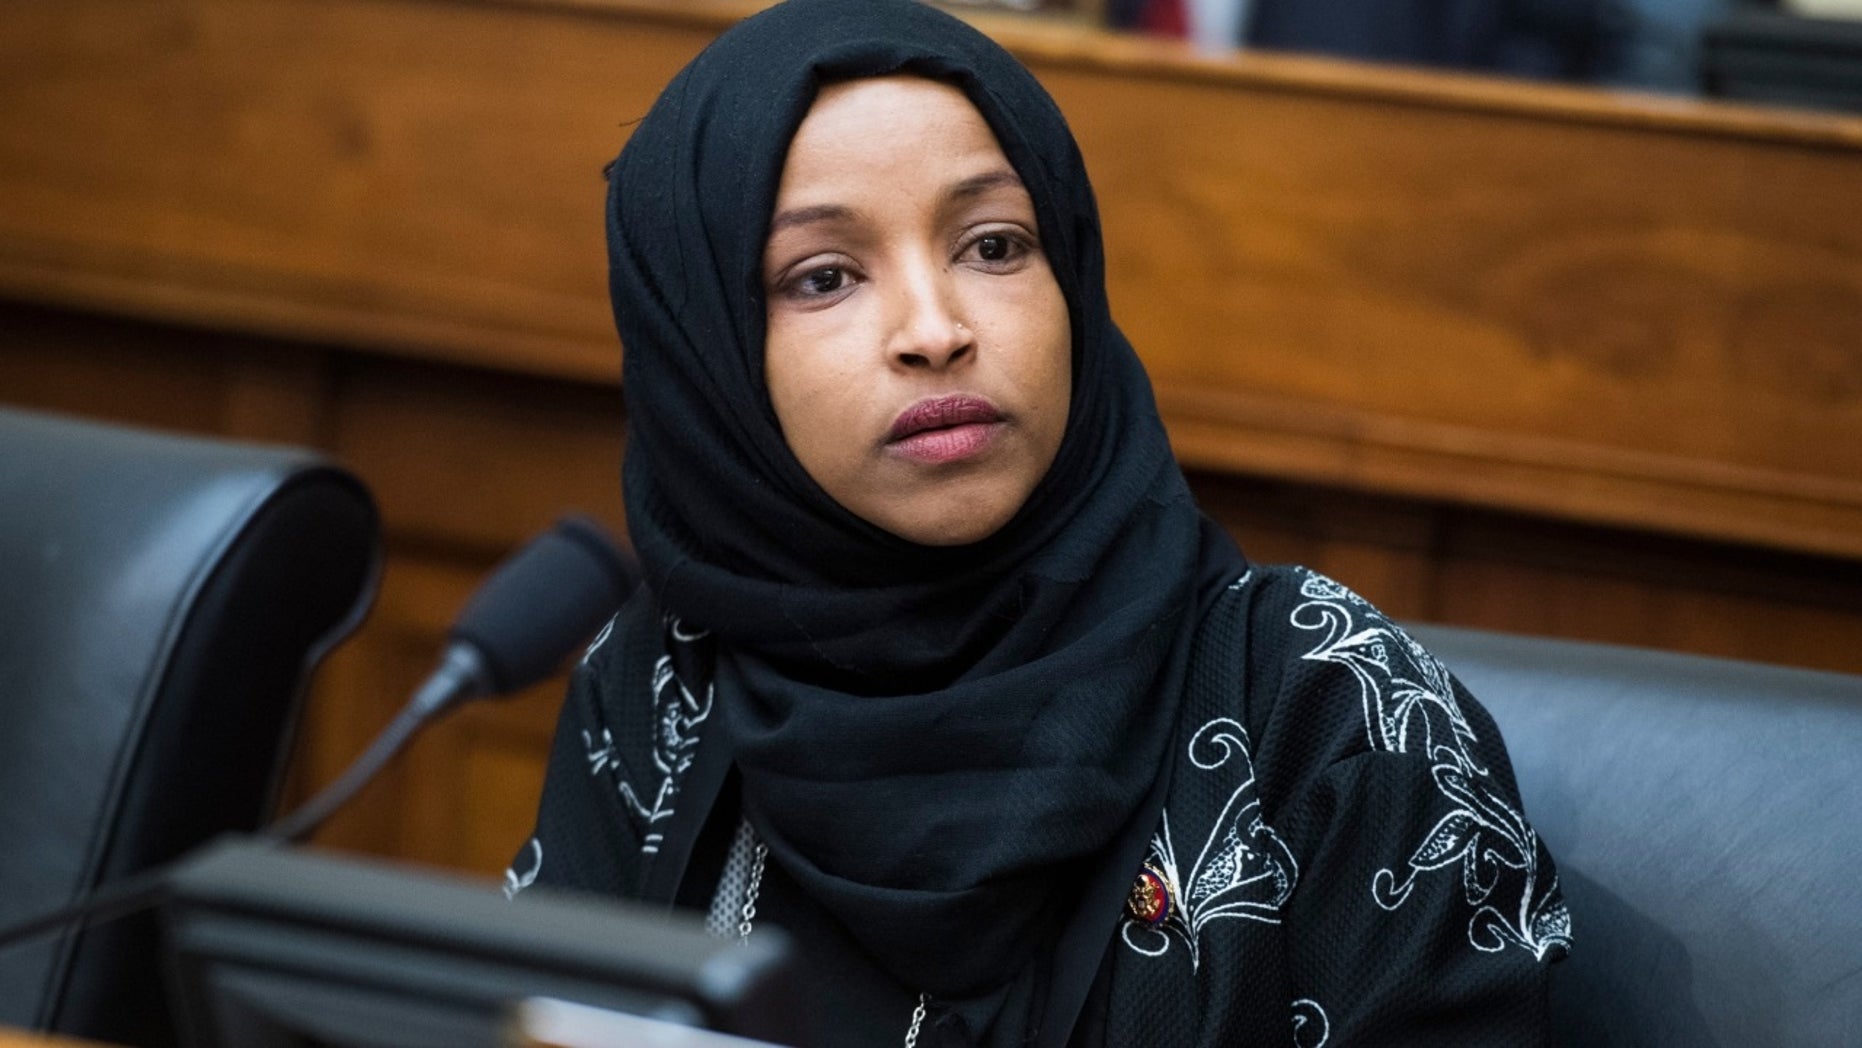 A poster that was posted Friday at the West Virginia Statehouse linking the representative Ilhan Omar, D-Minn., To the terrorist attacks of September 11, 2001, sparked an uproar between lawmakers, according to a report. 